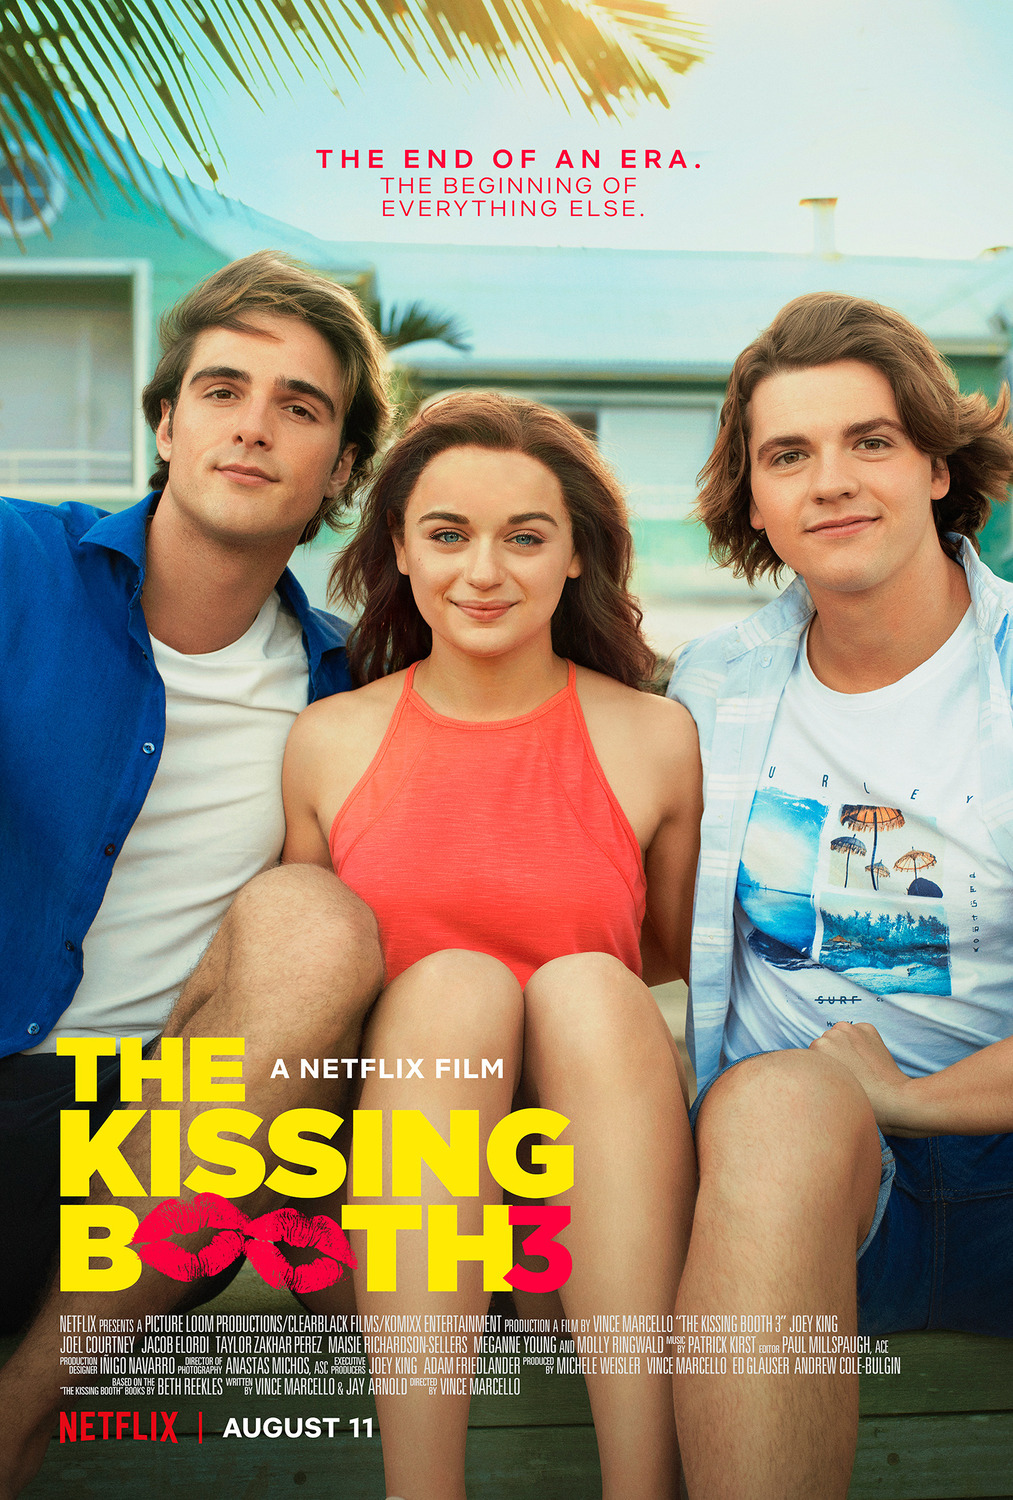 Download The Kissing Booth 3 (2021) Dual Audio {Hindi ORG+English} WEB DL ESubs 1080p [2.4.GB] | 720p | [1GB] | 480p [350MB] download